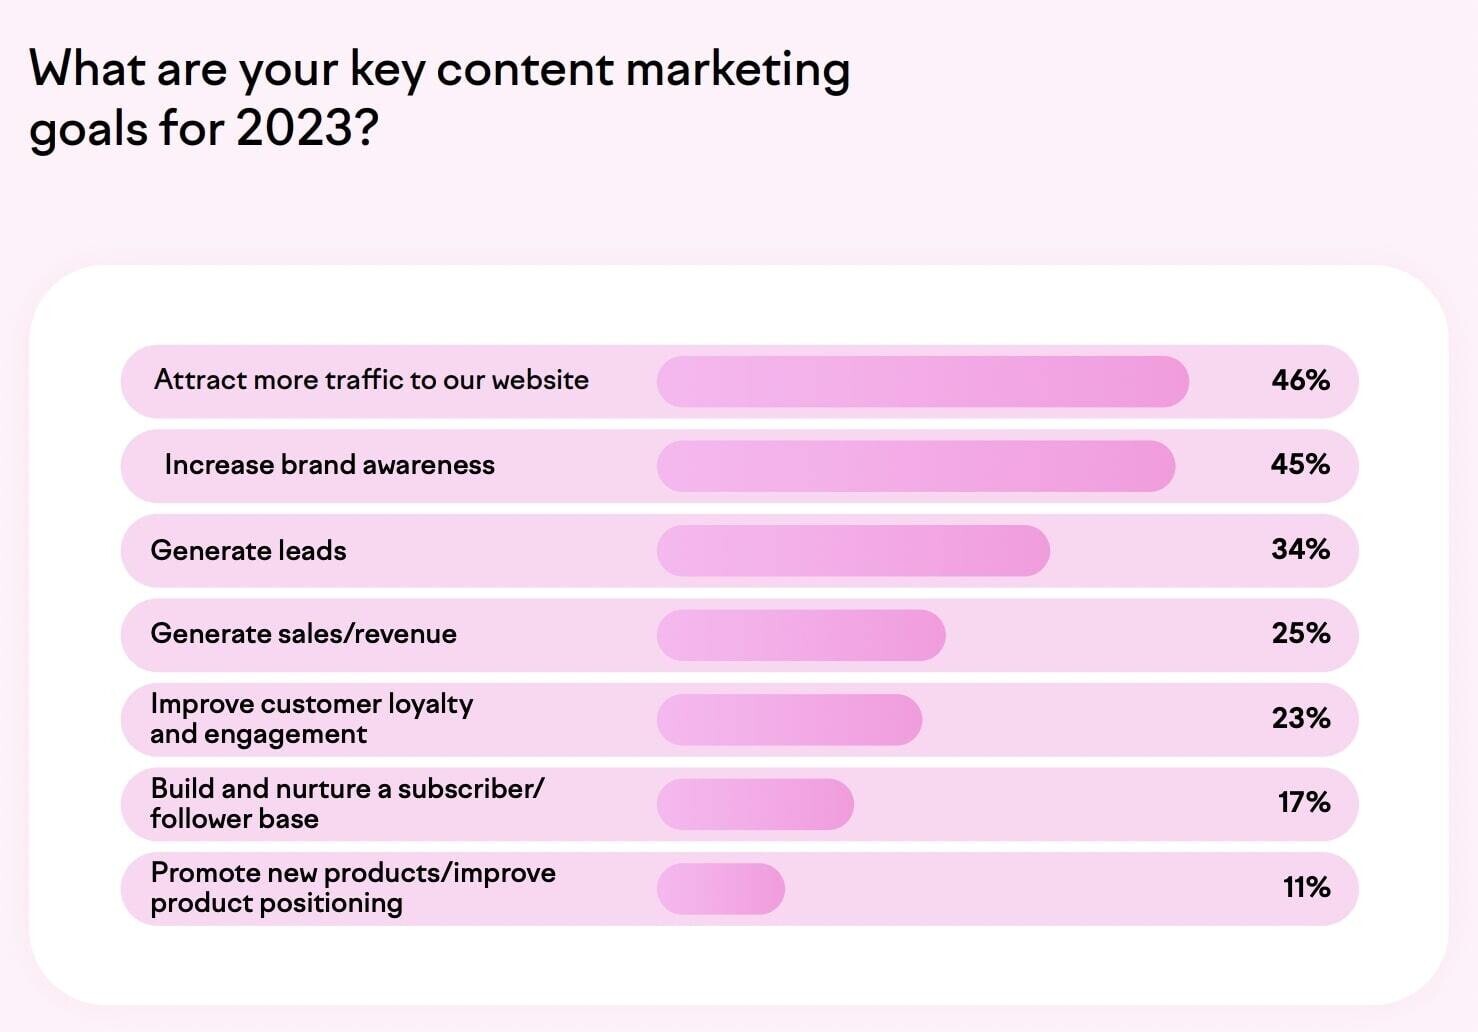 Answers to "what are your key content marketing goals for 2023?" question